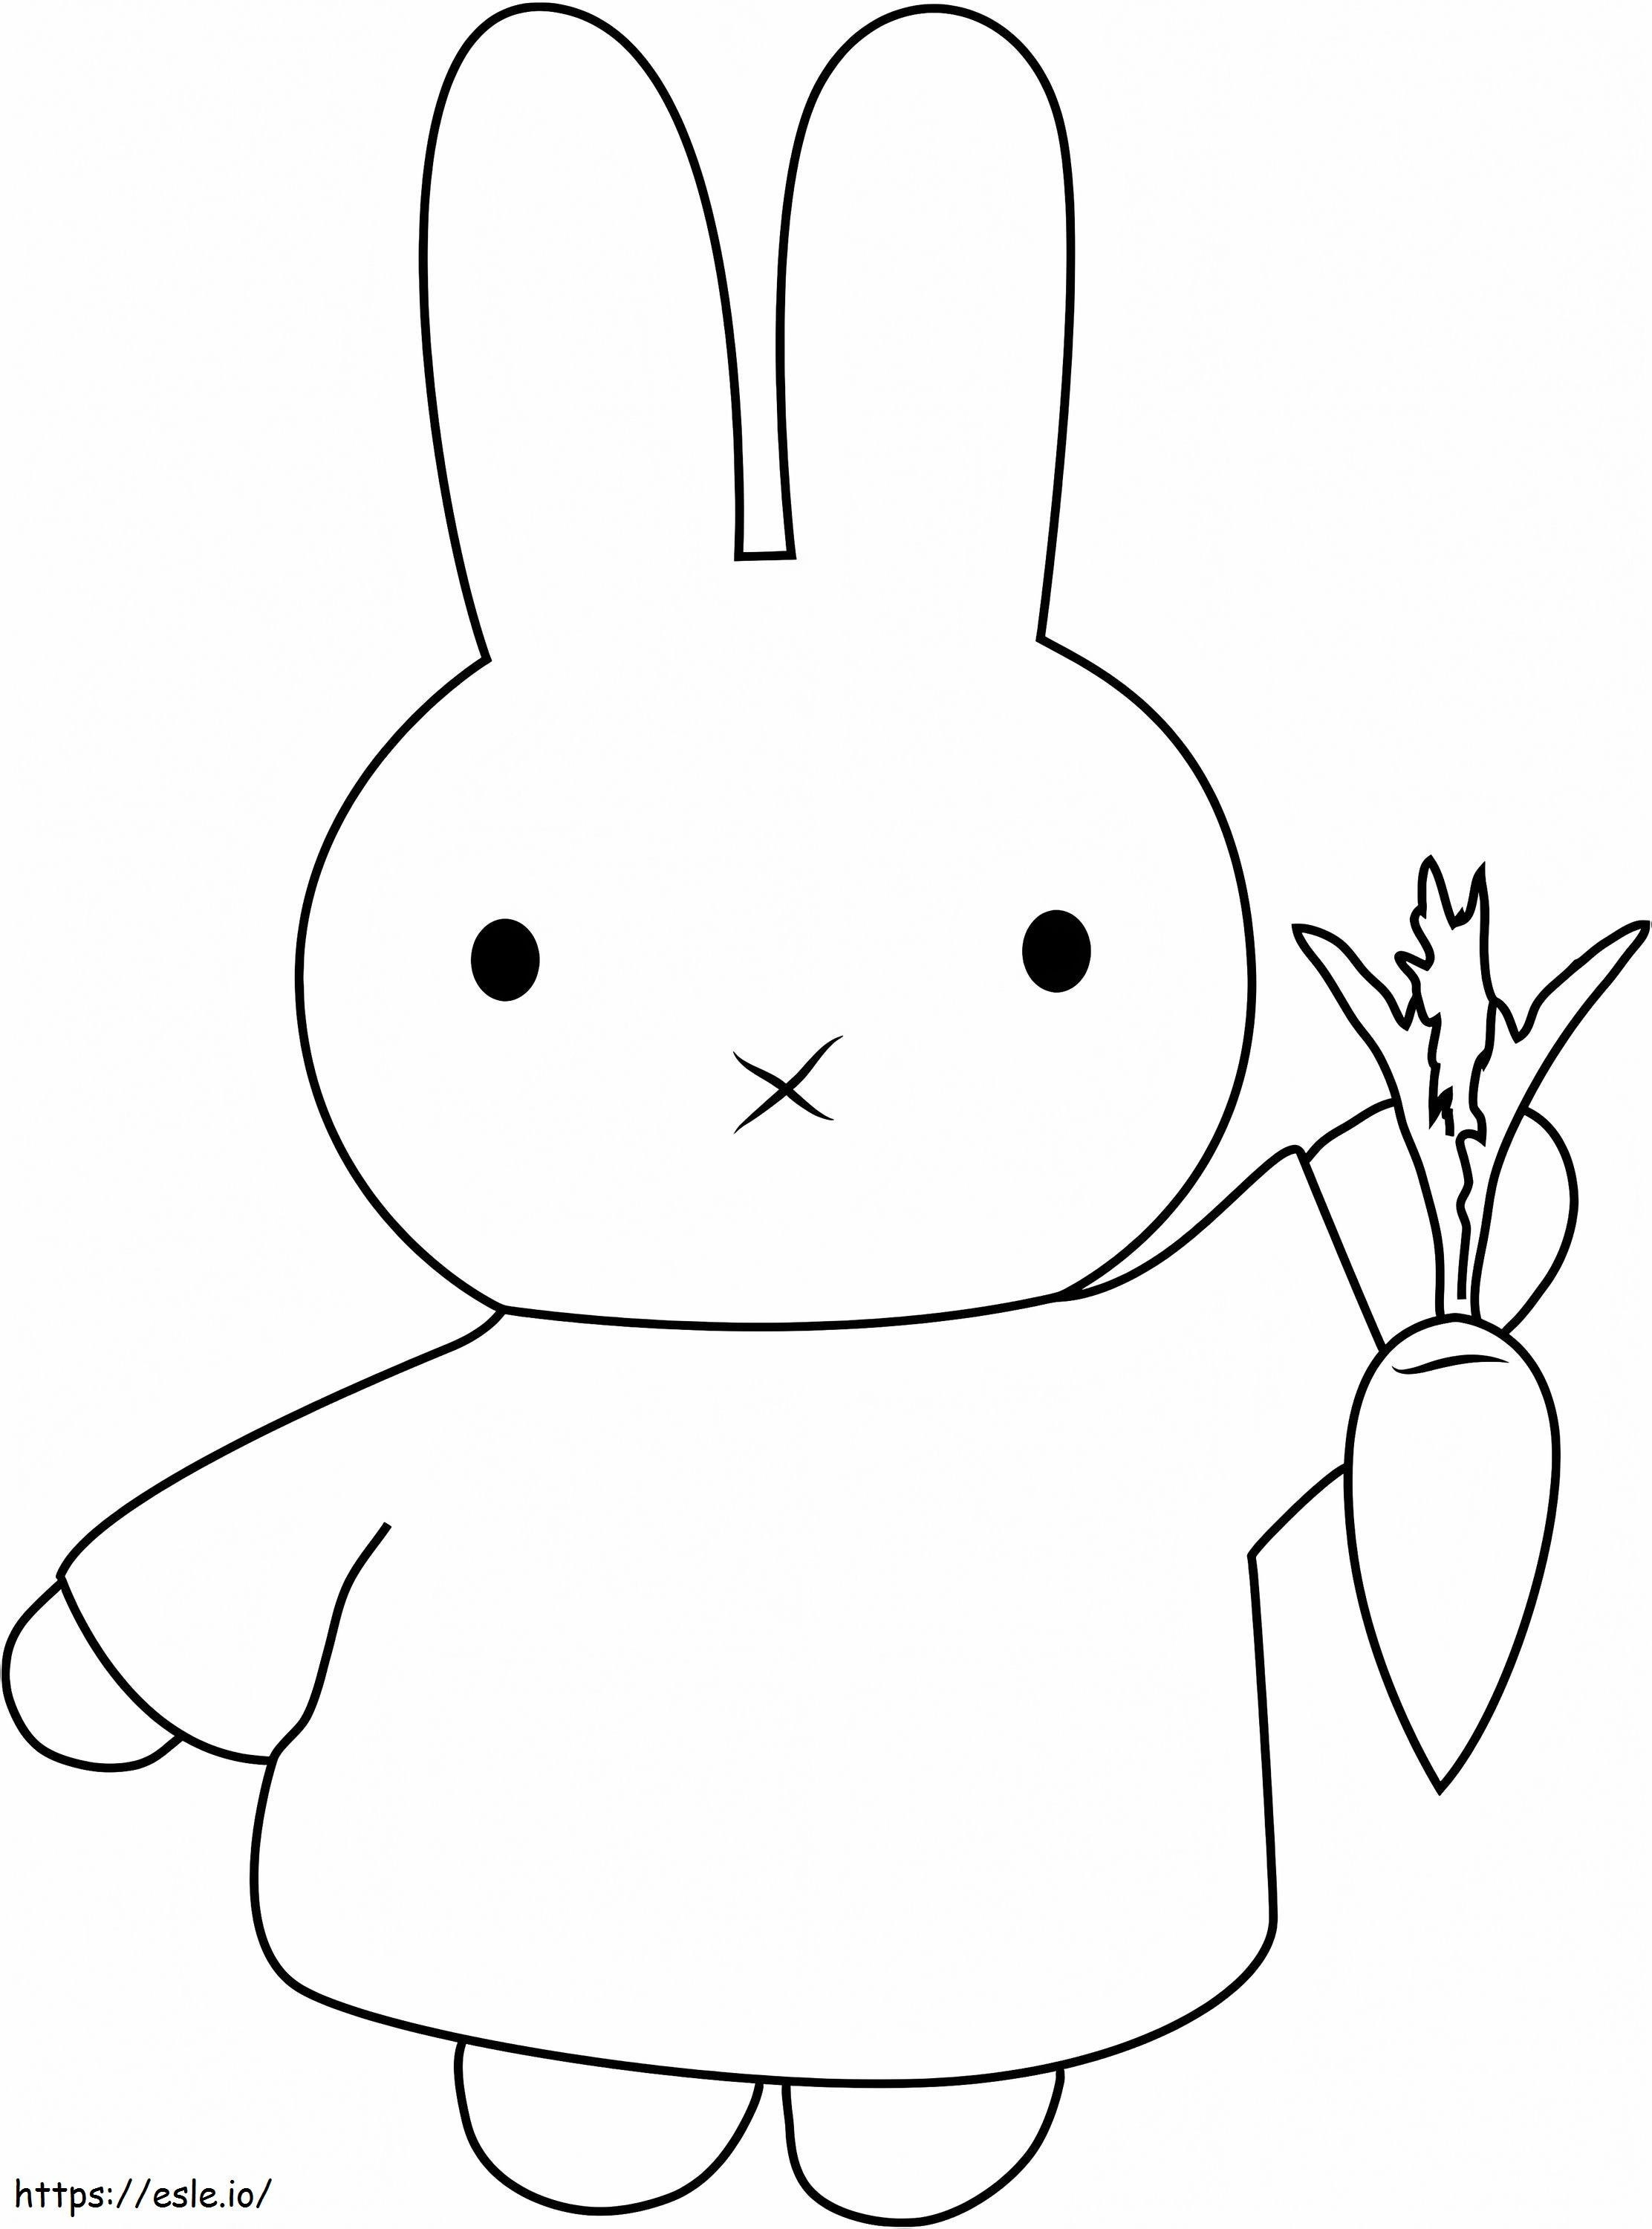 1531885666 Miffy Holding Carrot A4 coloring page